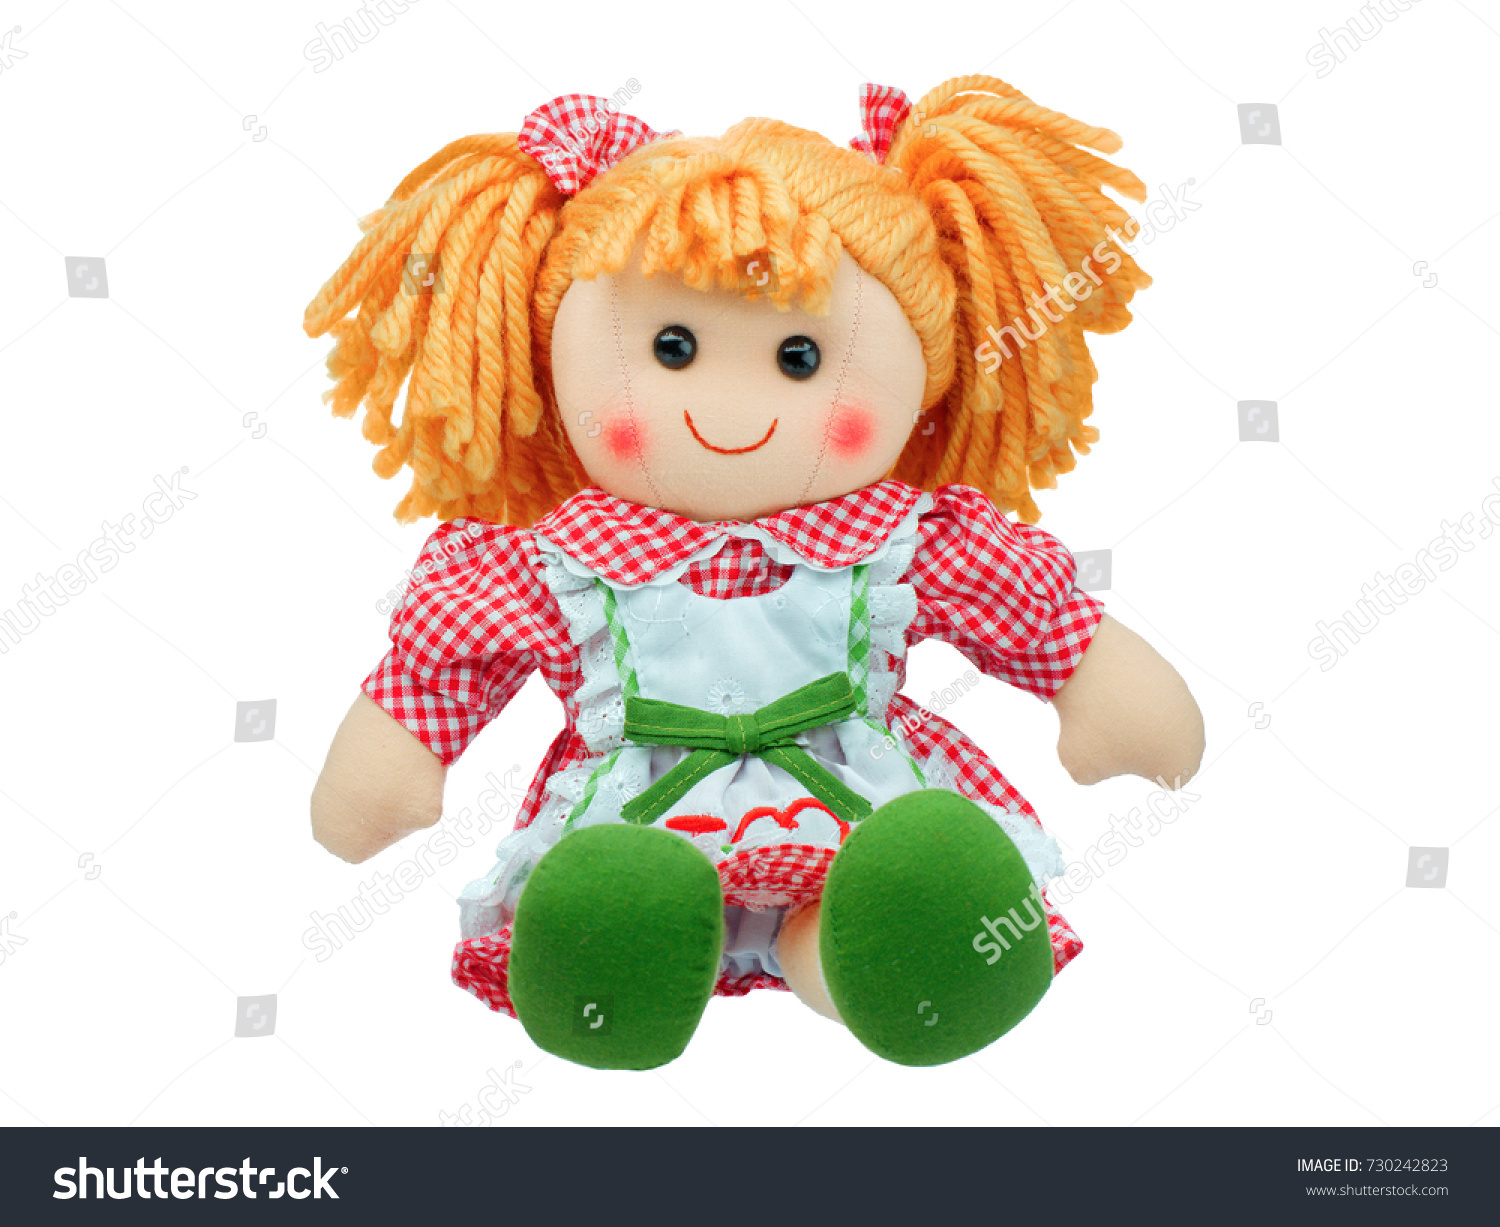 Smiling sit Cute rag doll isolated #730242823